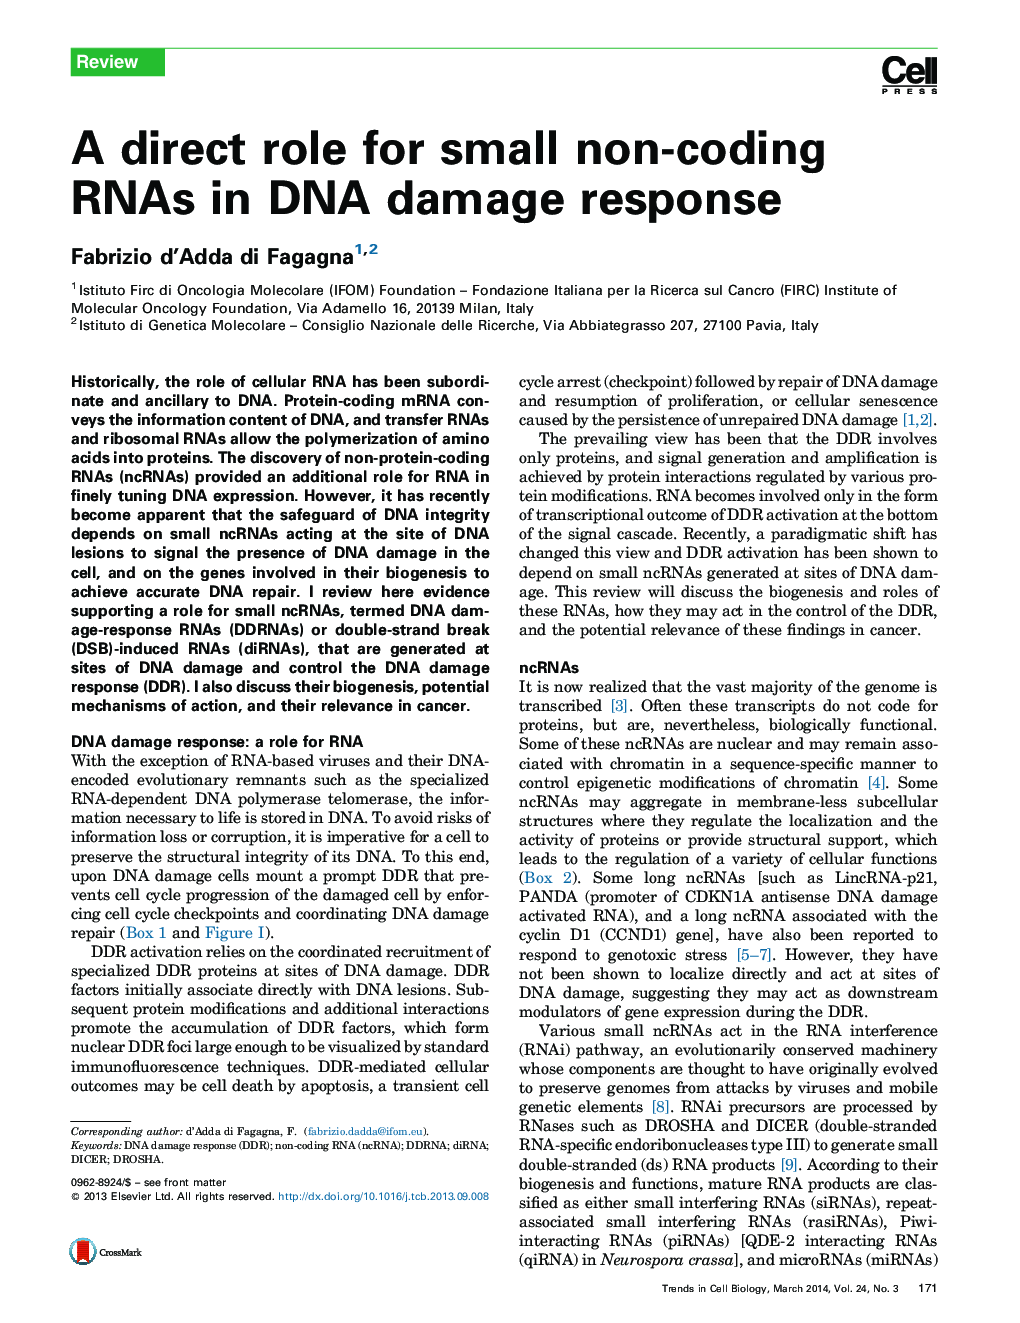 A direct role for small non-coding RNAs in DNA damage response